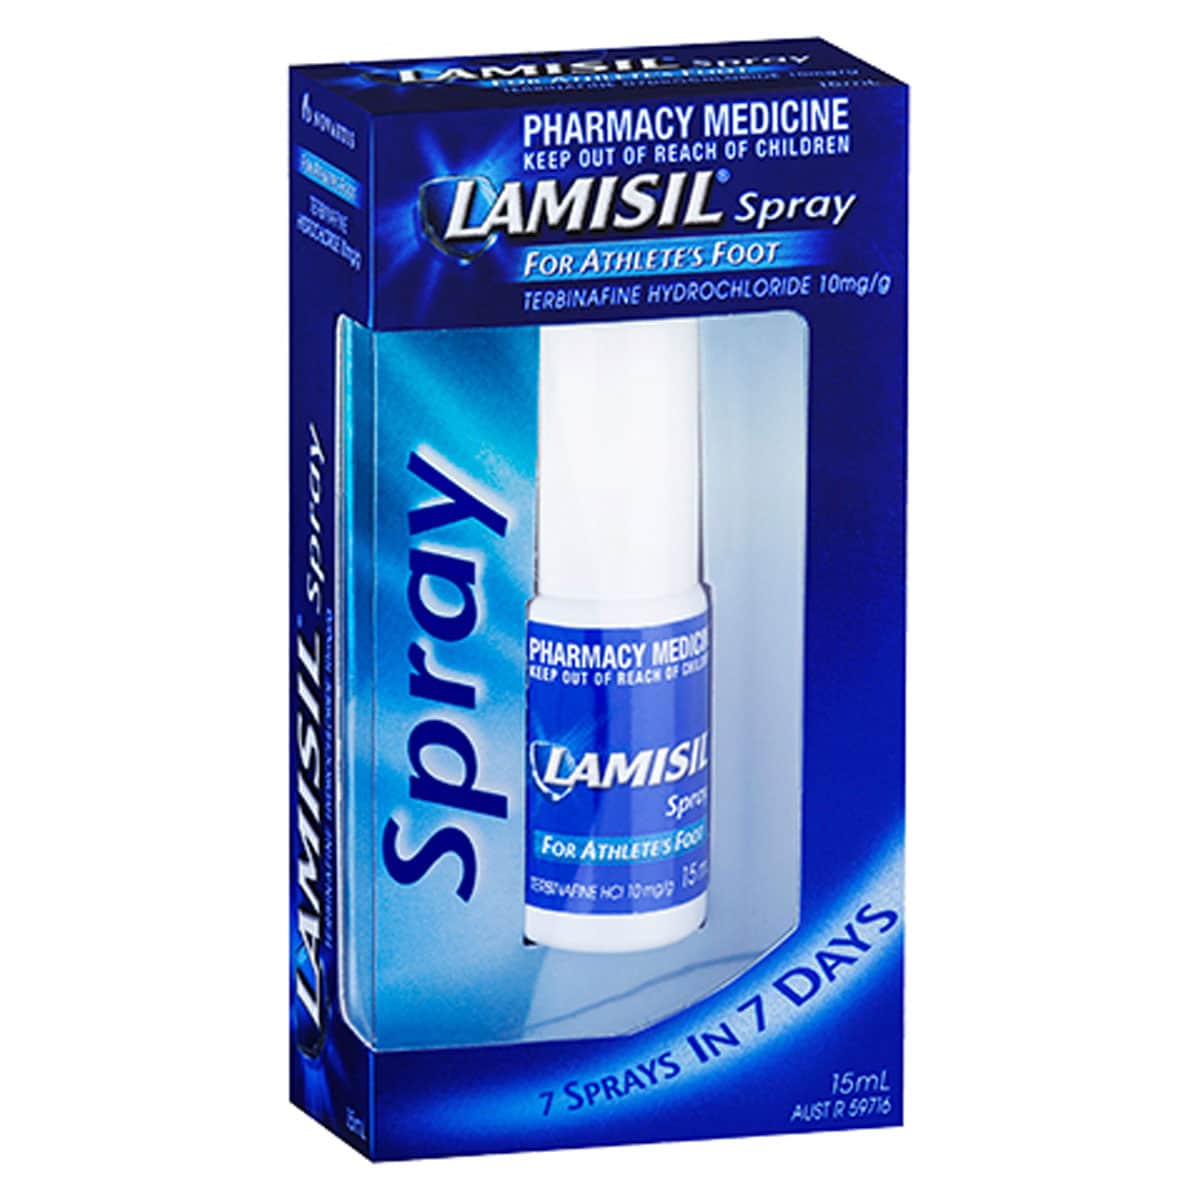 Lamisil Spray for Athletes Foot 15ml